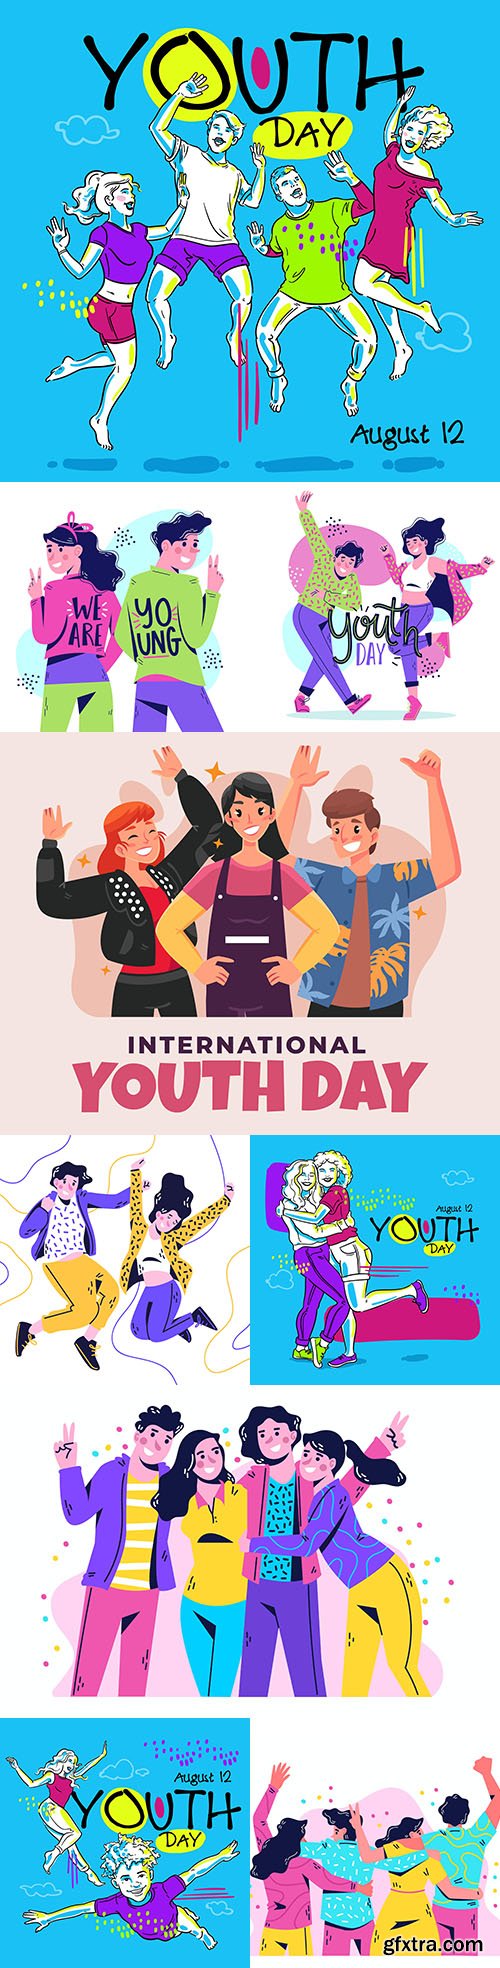 Youth Day people welcome and dance illustration